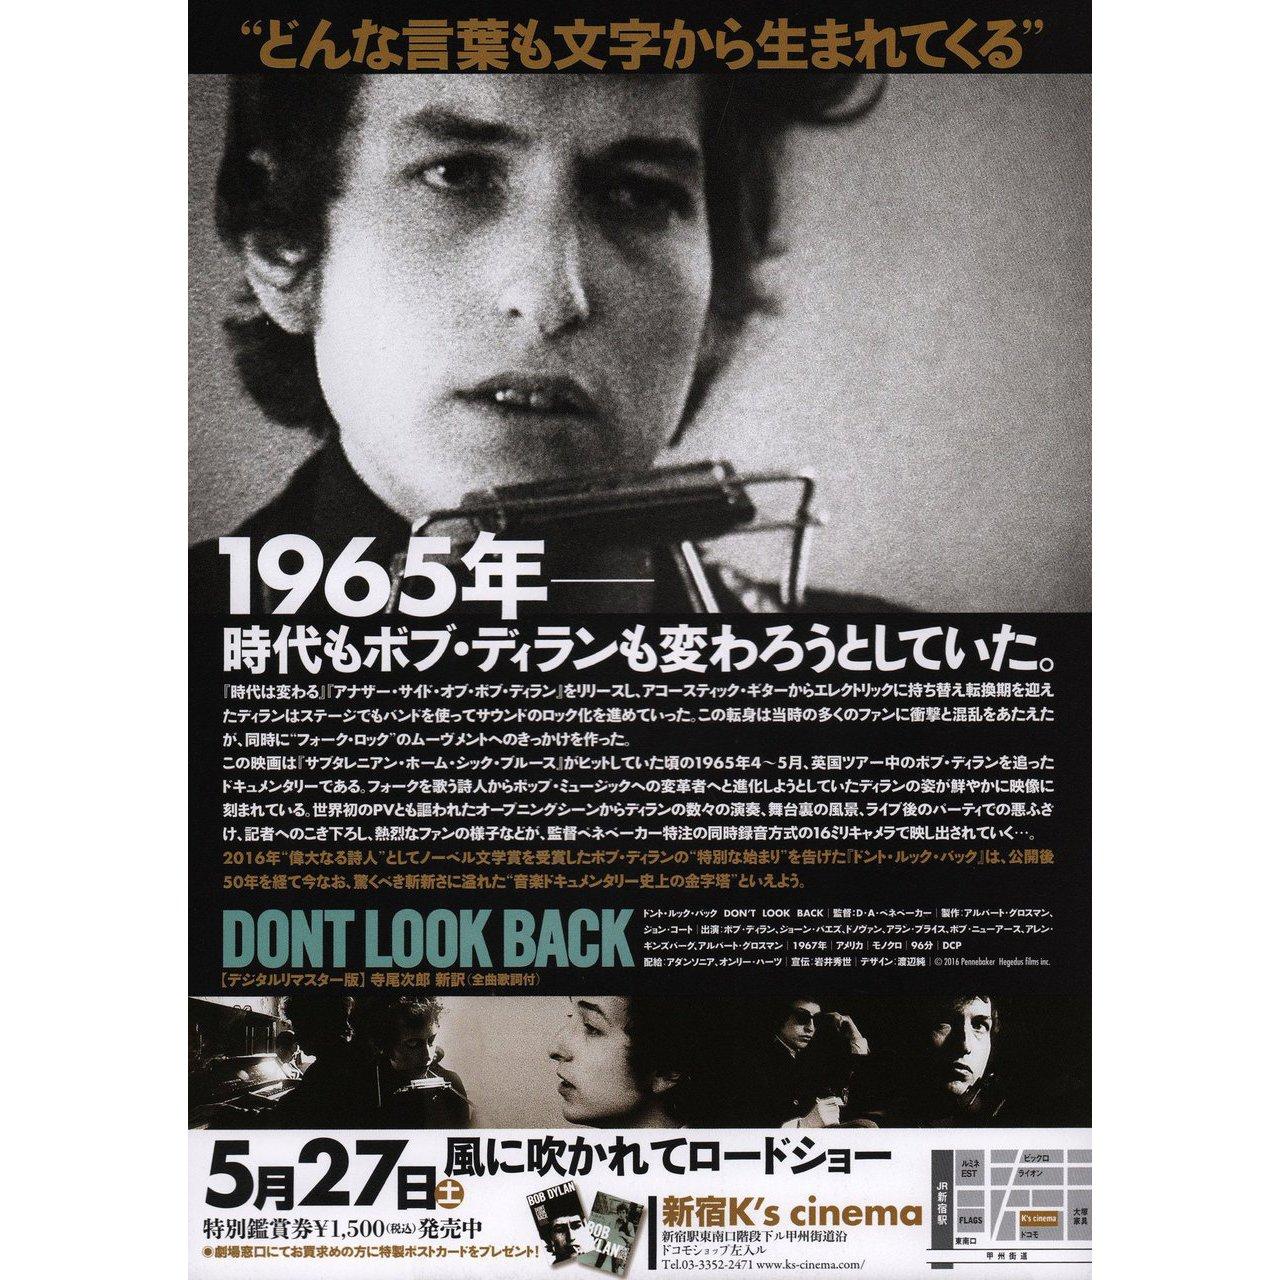 Original 2016 re-release Japanese B5 chirashi flyer for the 1967 documentary film Don't Look Back directed by D.A. Pennebaker with Bob Dylan / Albert Grossman / Bob Neuwirth / Joan Baez. Fine condition, rolled. Please note: the size is stated in